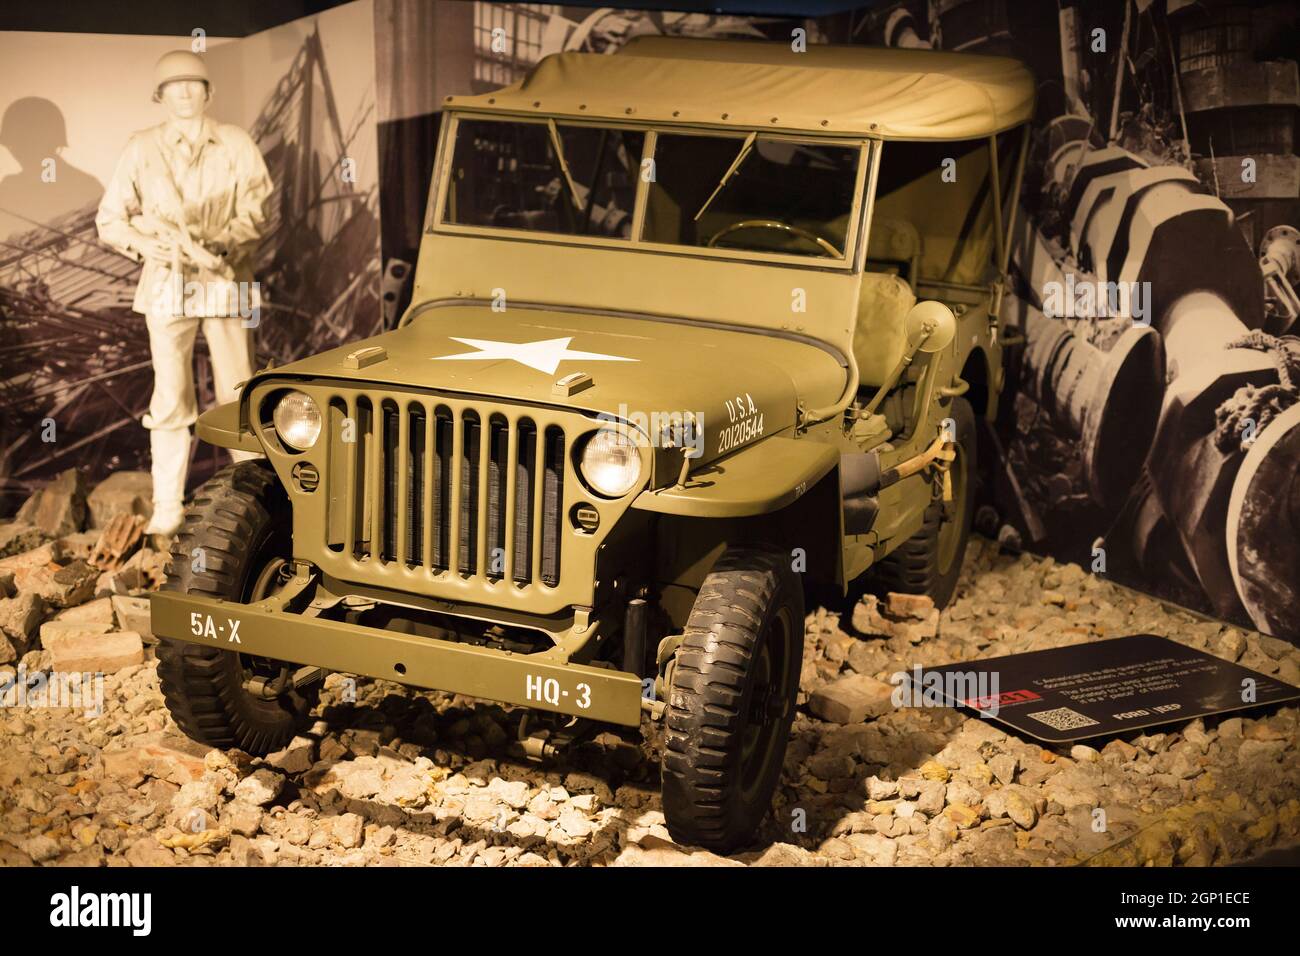 Torino, Italy - August 13, 2021: 1941 Ford Jeep showcased at the National Automobile Museum (MAUTO) in Torino, Italy. Stock Photo